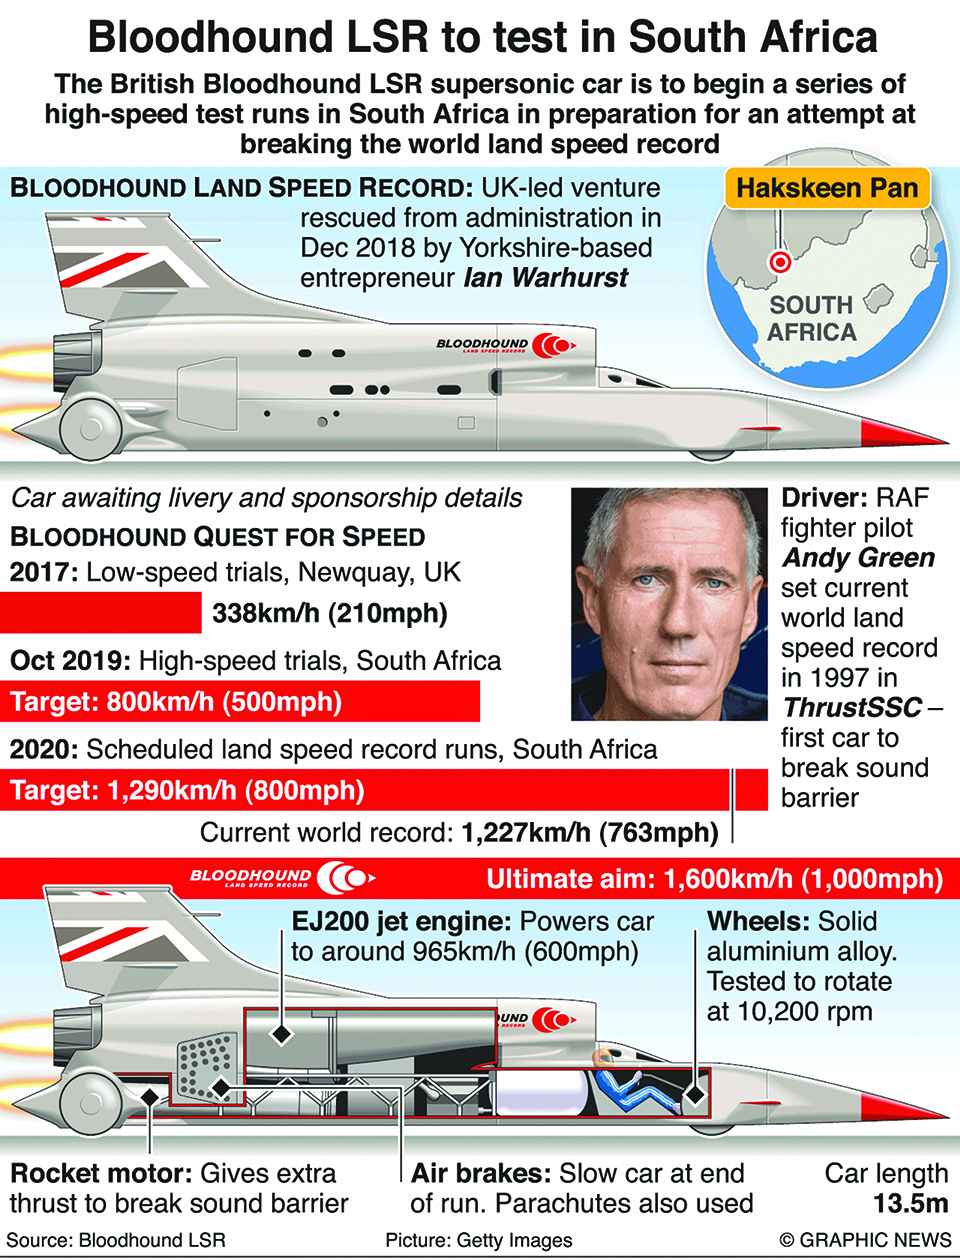 Infographics: 1,000mph Bloodhound car set for high-speed tests